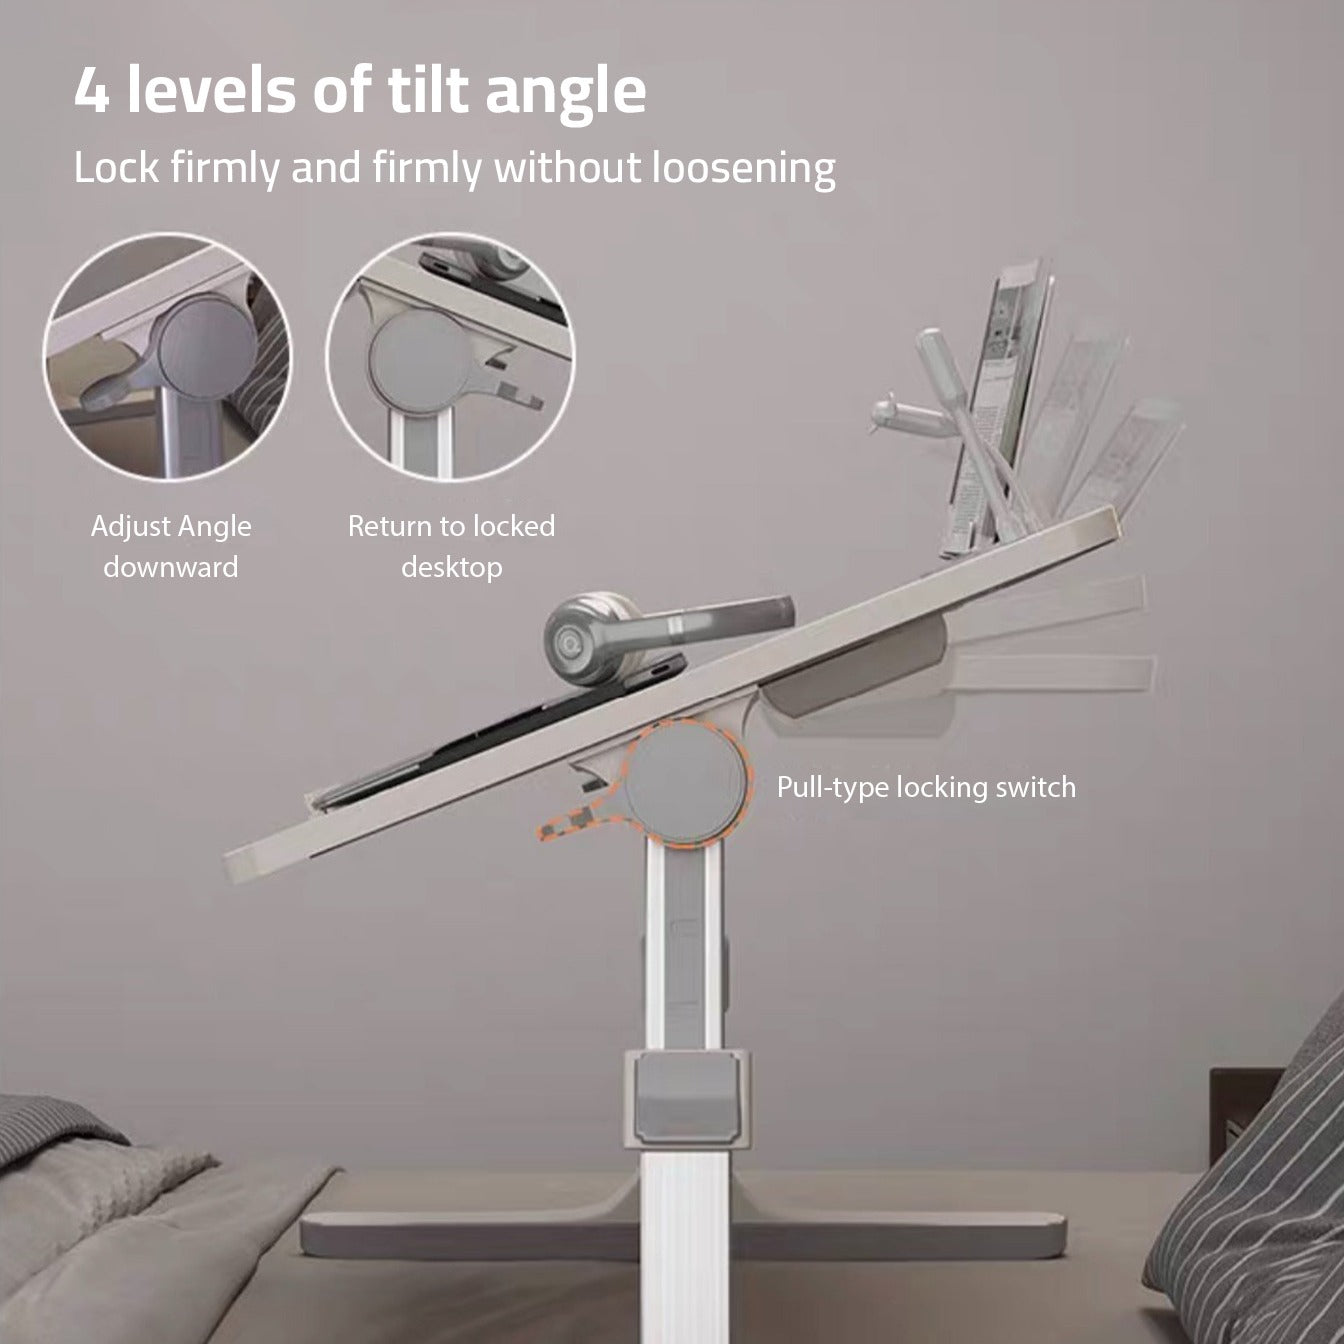 A laptop stand with 4 levels of tilt angle. Adjustable Bed Laptop Table - Foldable Lifting Desk for various tasks